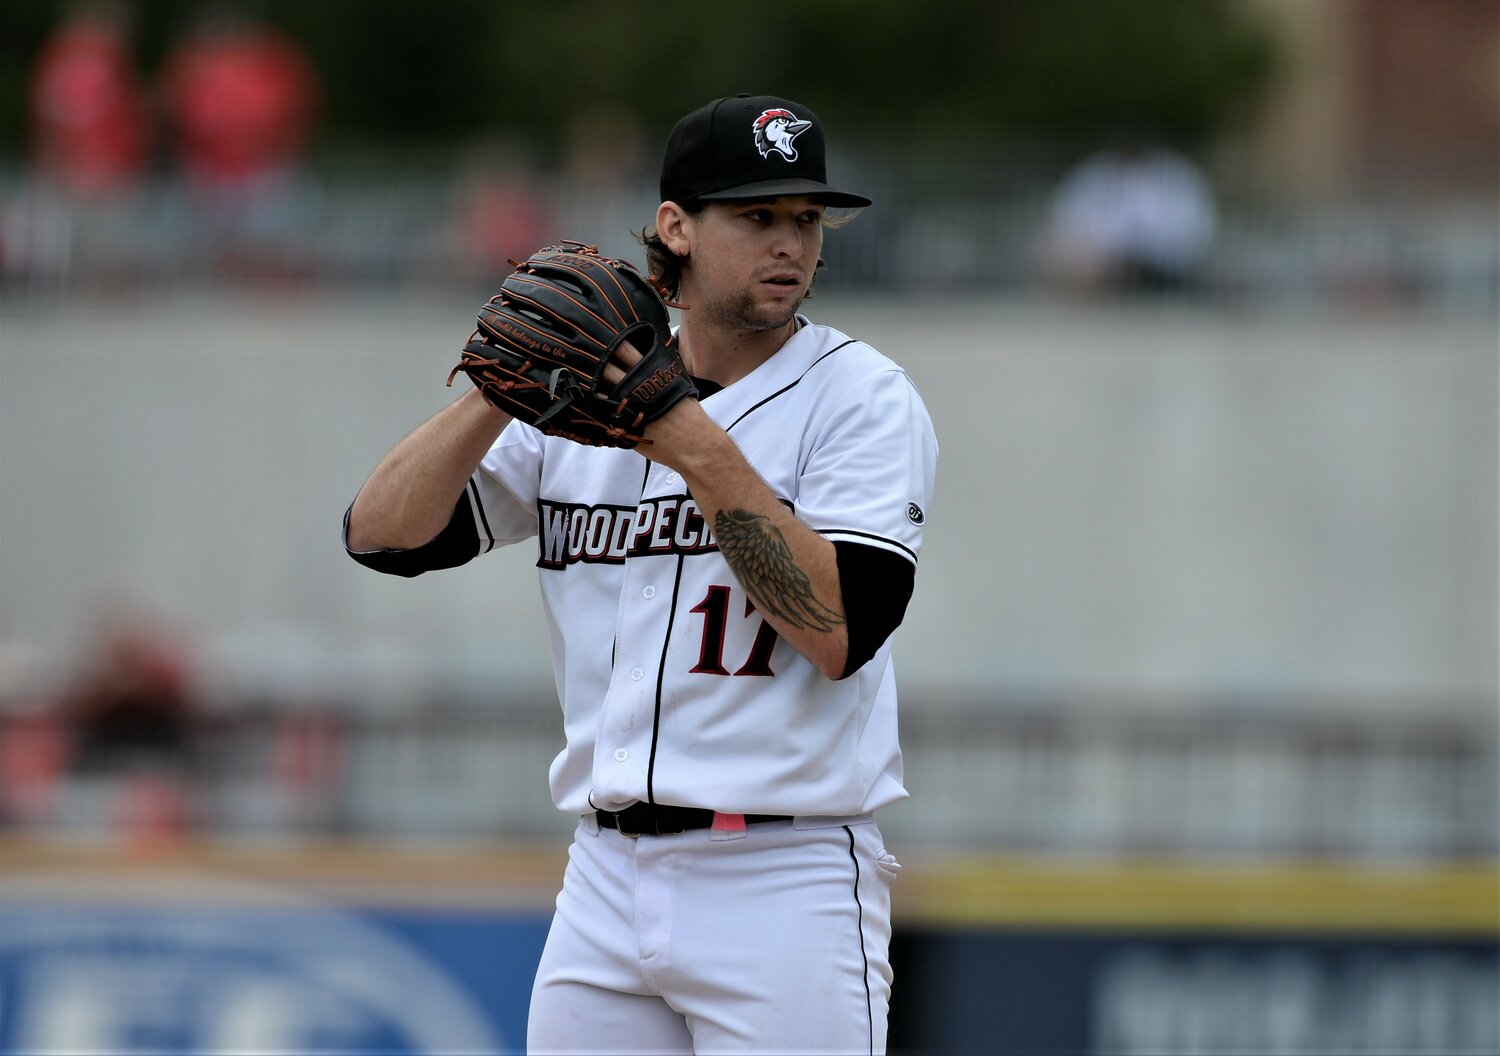 Nic Swanson (W, 2-2) went six innings for the Fayetteville Woodpeckers against the Carolina Mudcats on Thursday, allowing just one run and five hits over that span.